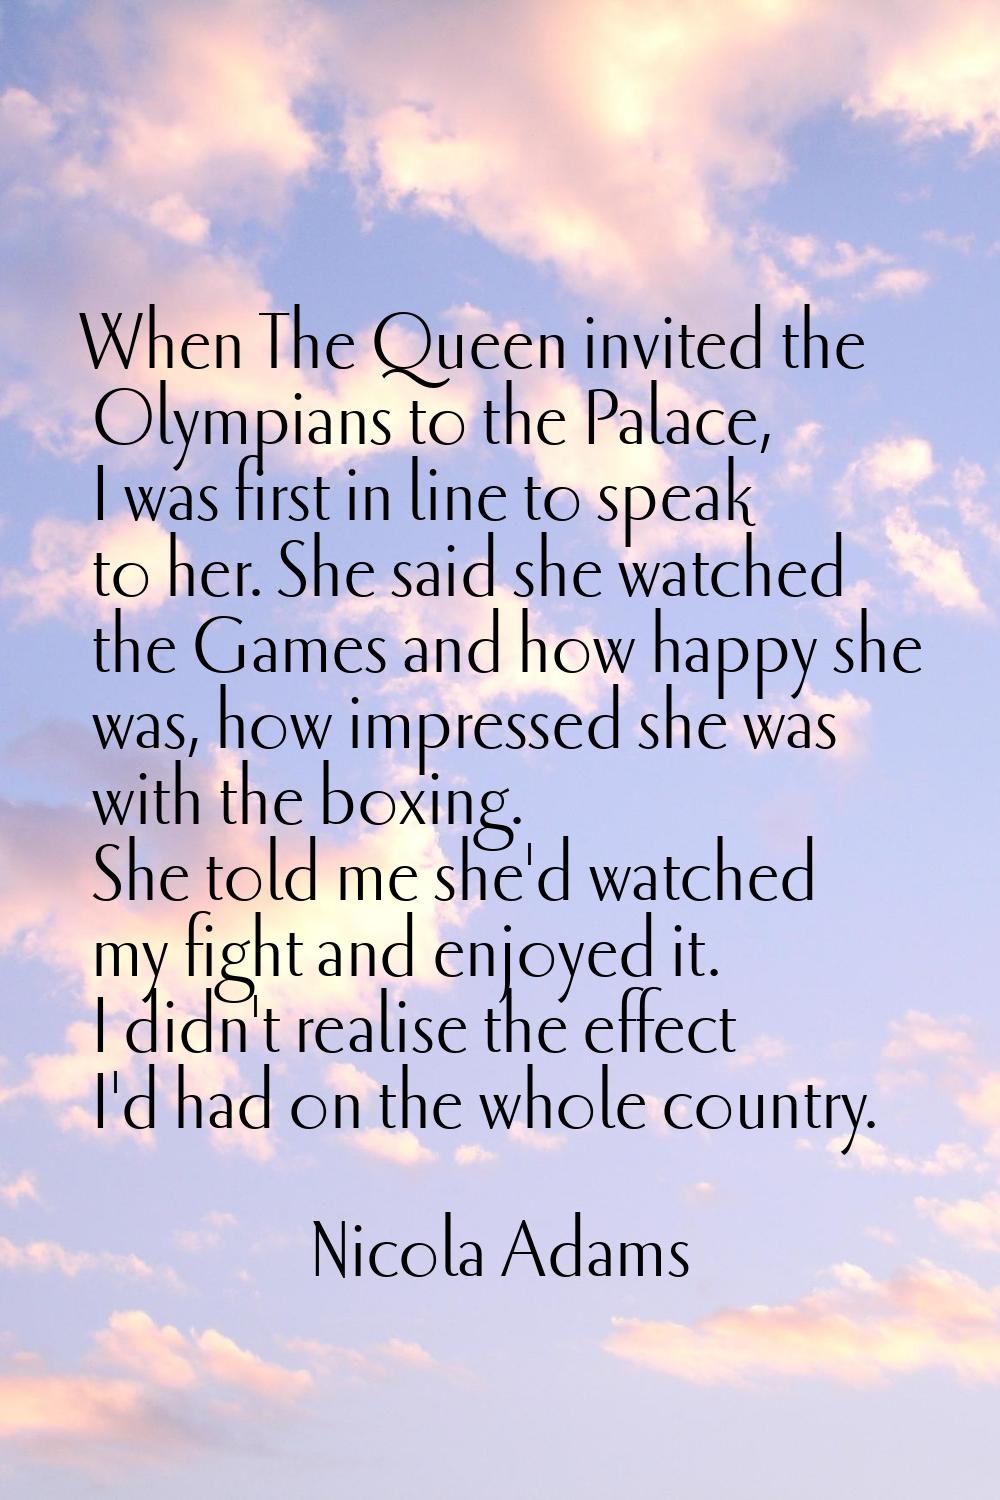 When The Queen invited the Olympians to the Palace, I was first in line to speak to her. She said s